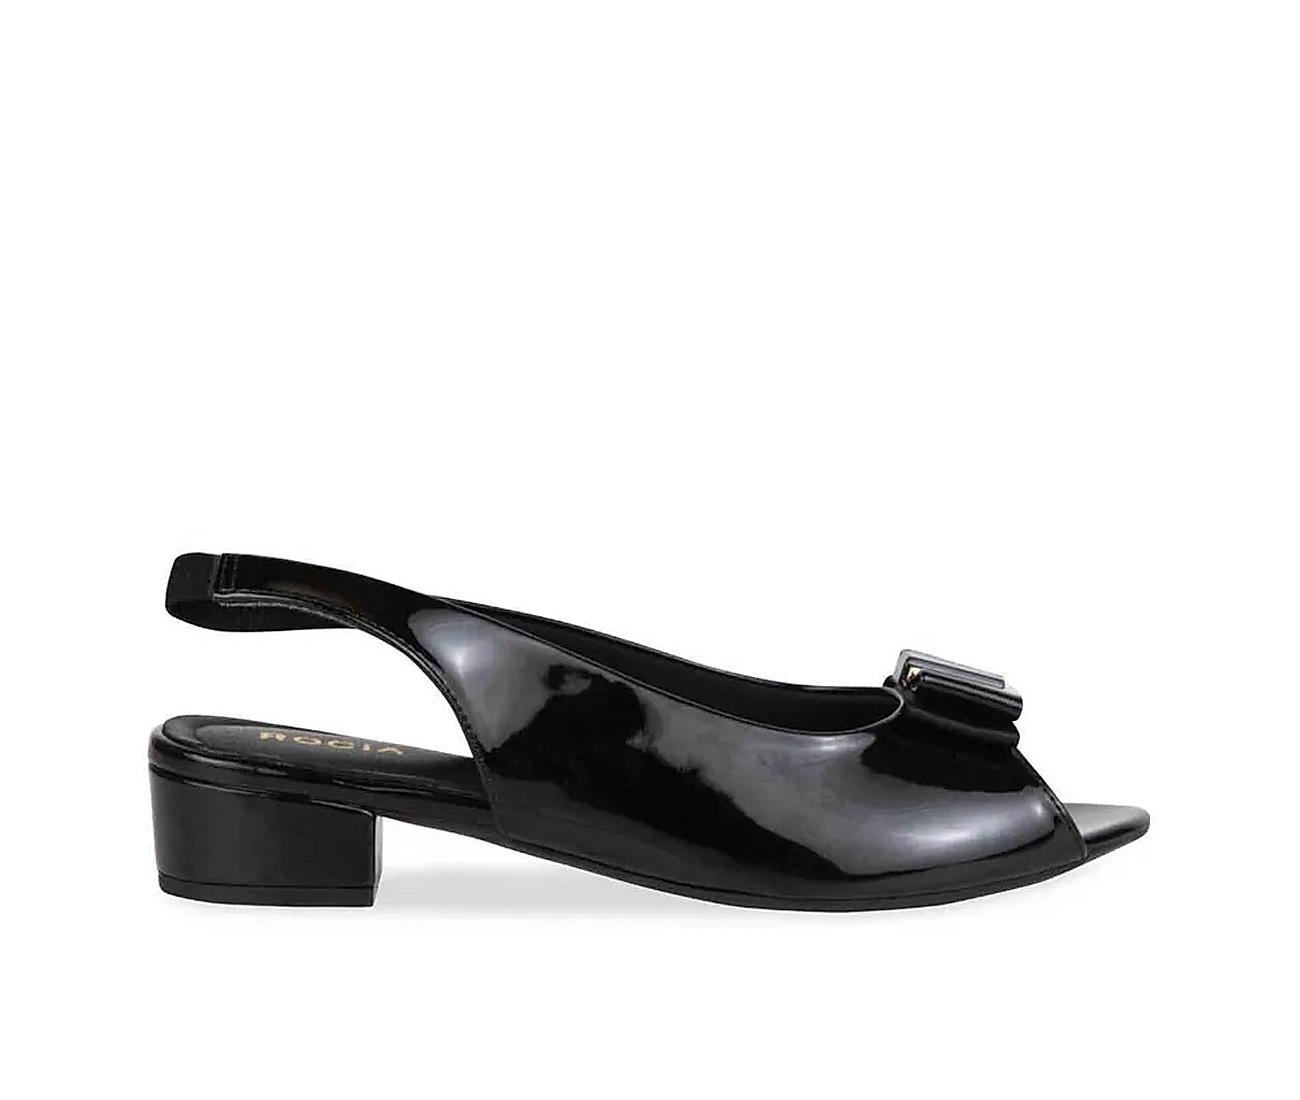 Top more than 75 womens black patent leather sandals best